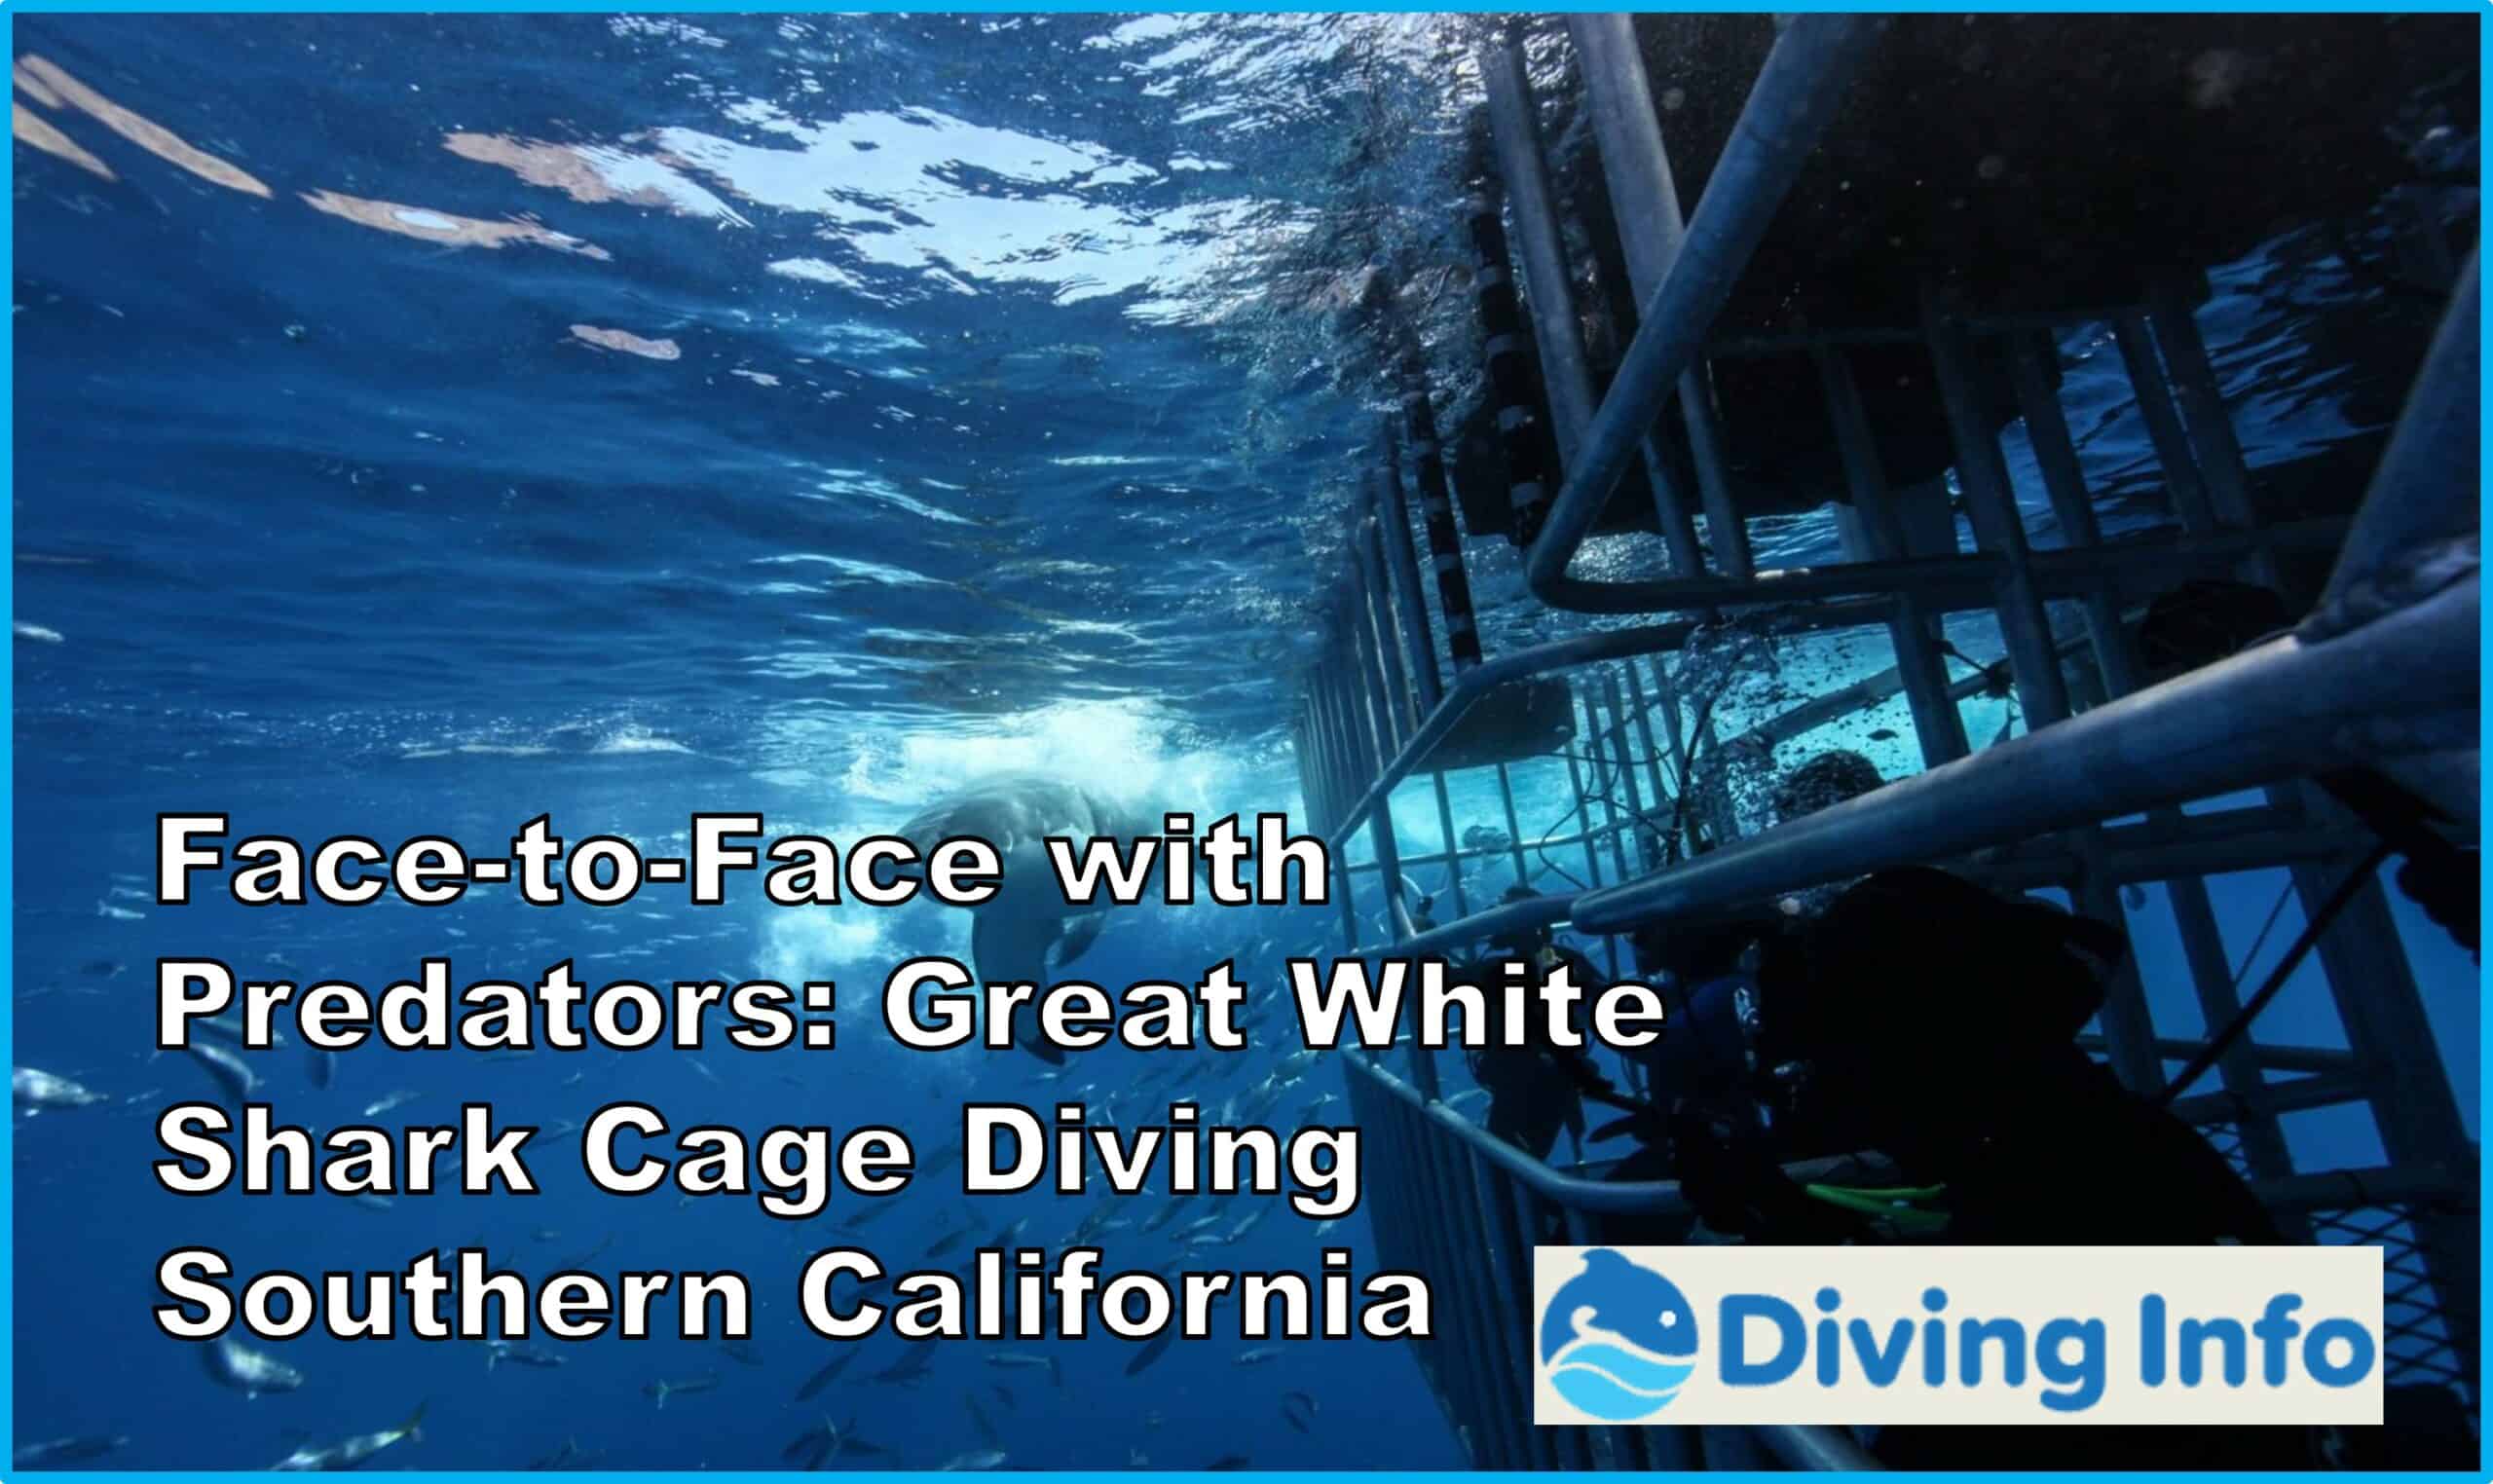 Face-to-Face with Predators Great White Shark Cage Diving Southern California